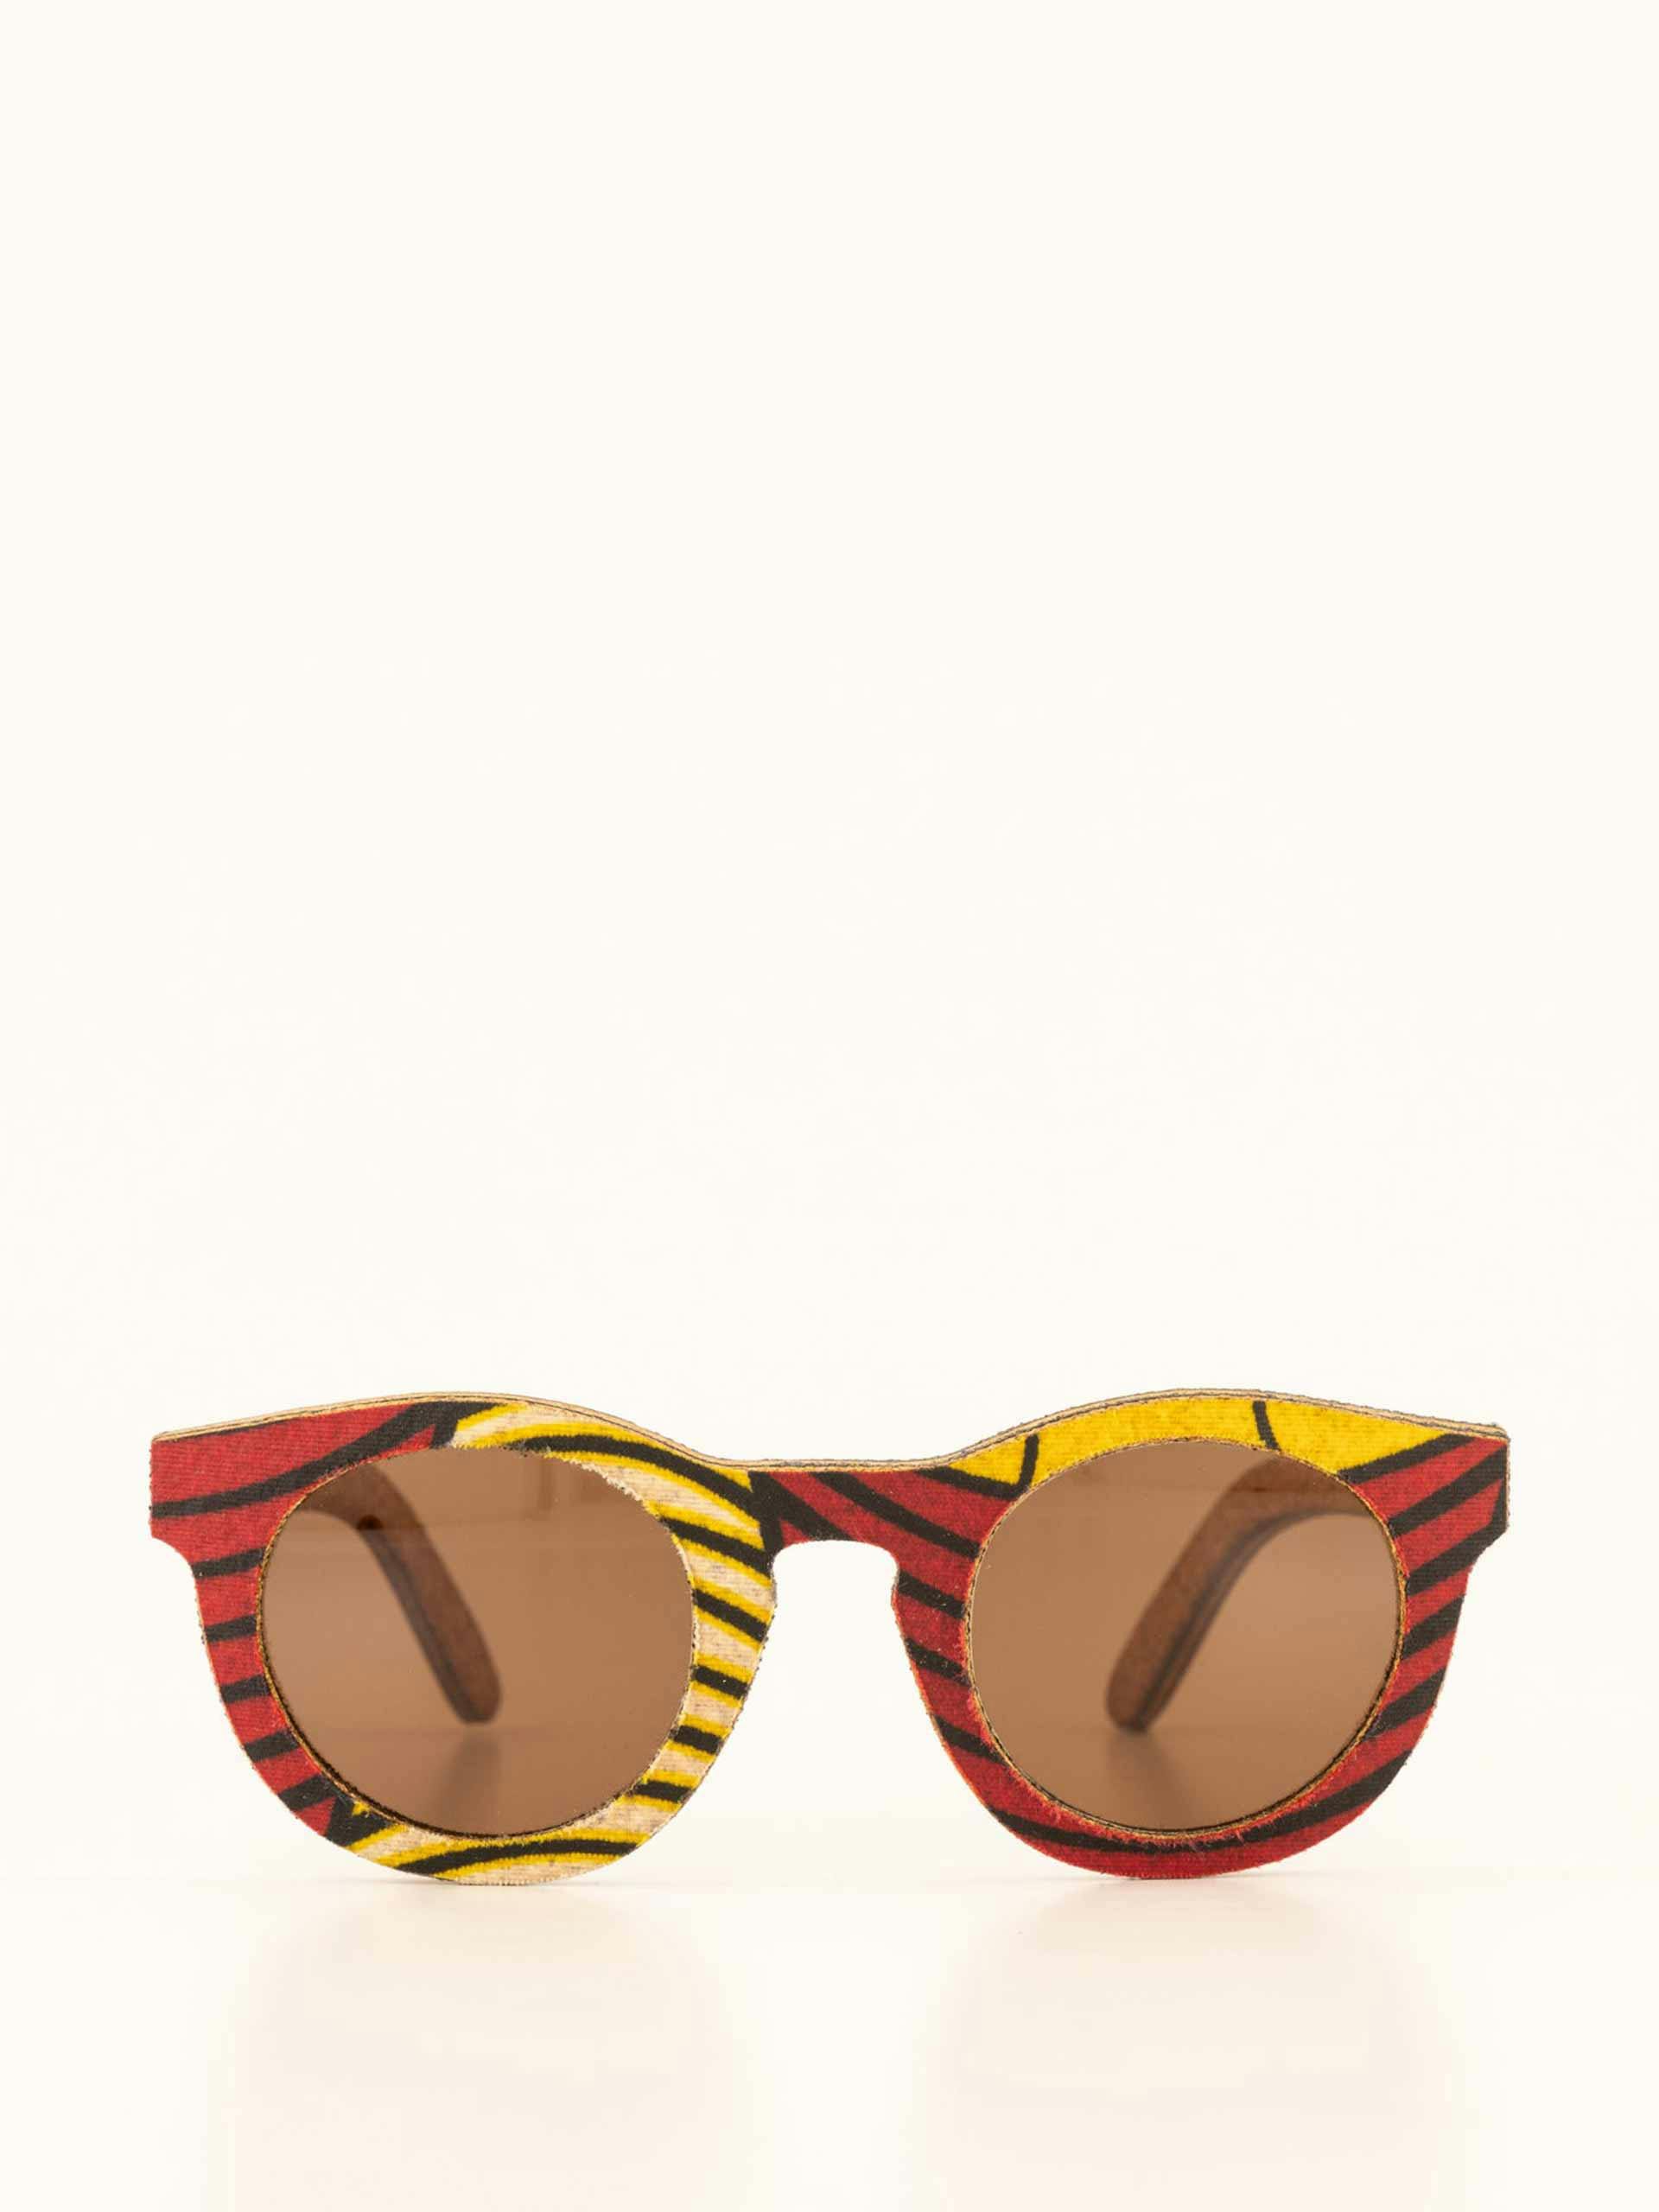 Red and yellow print cork sunglasses